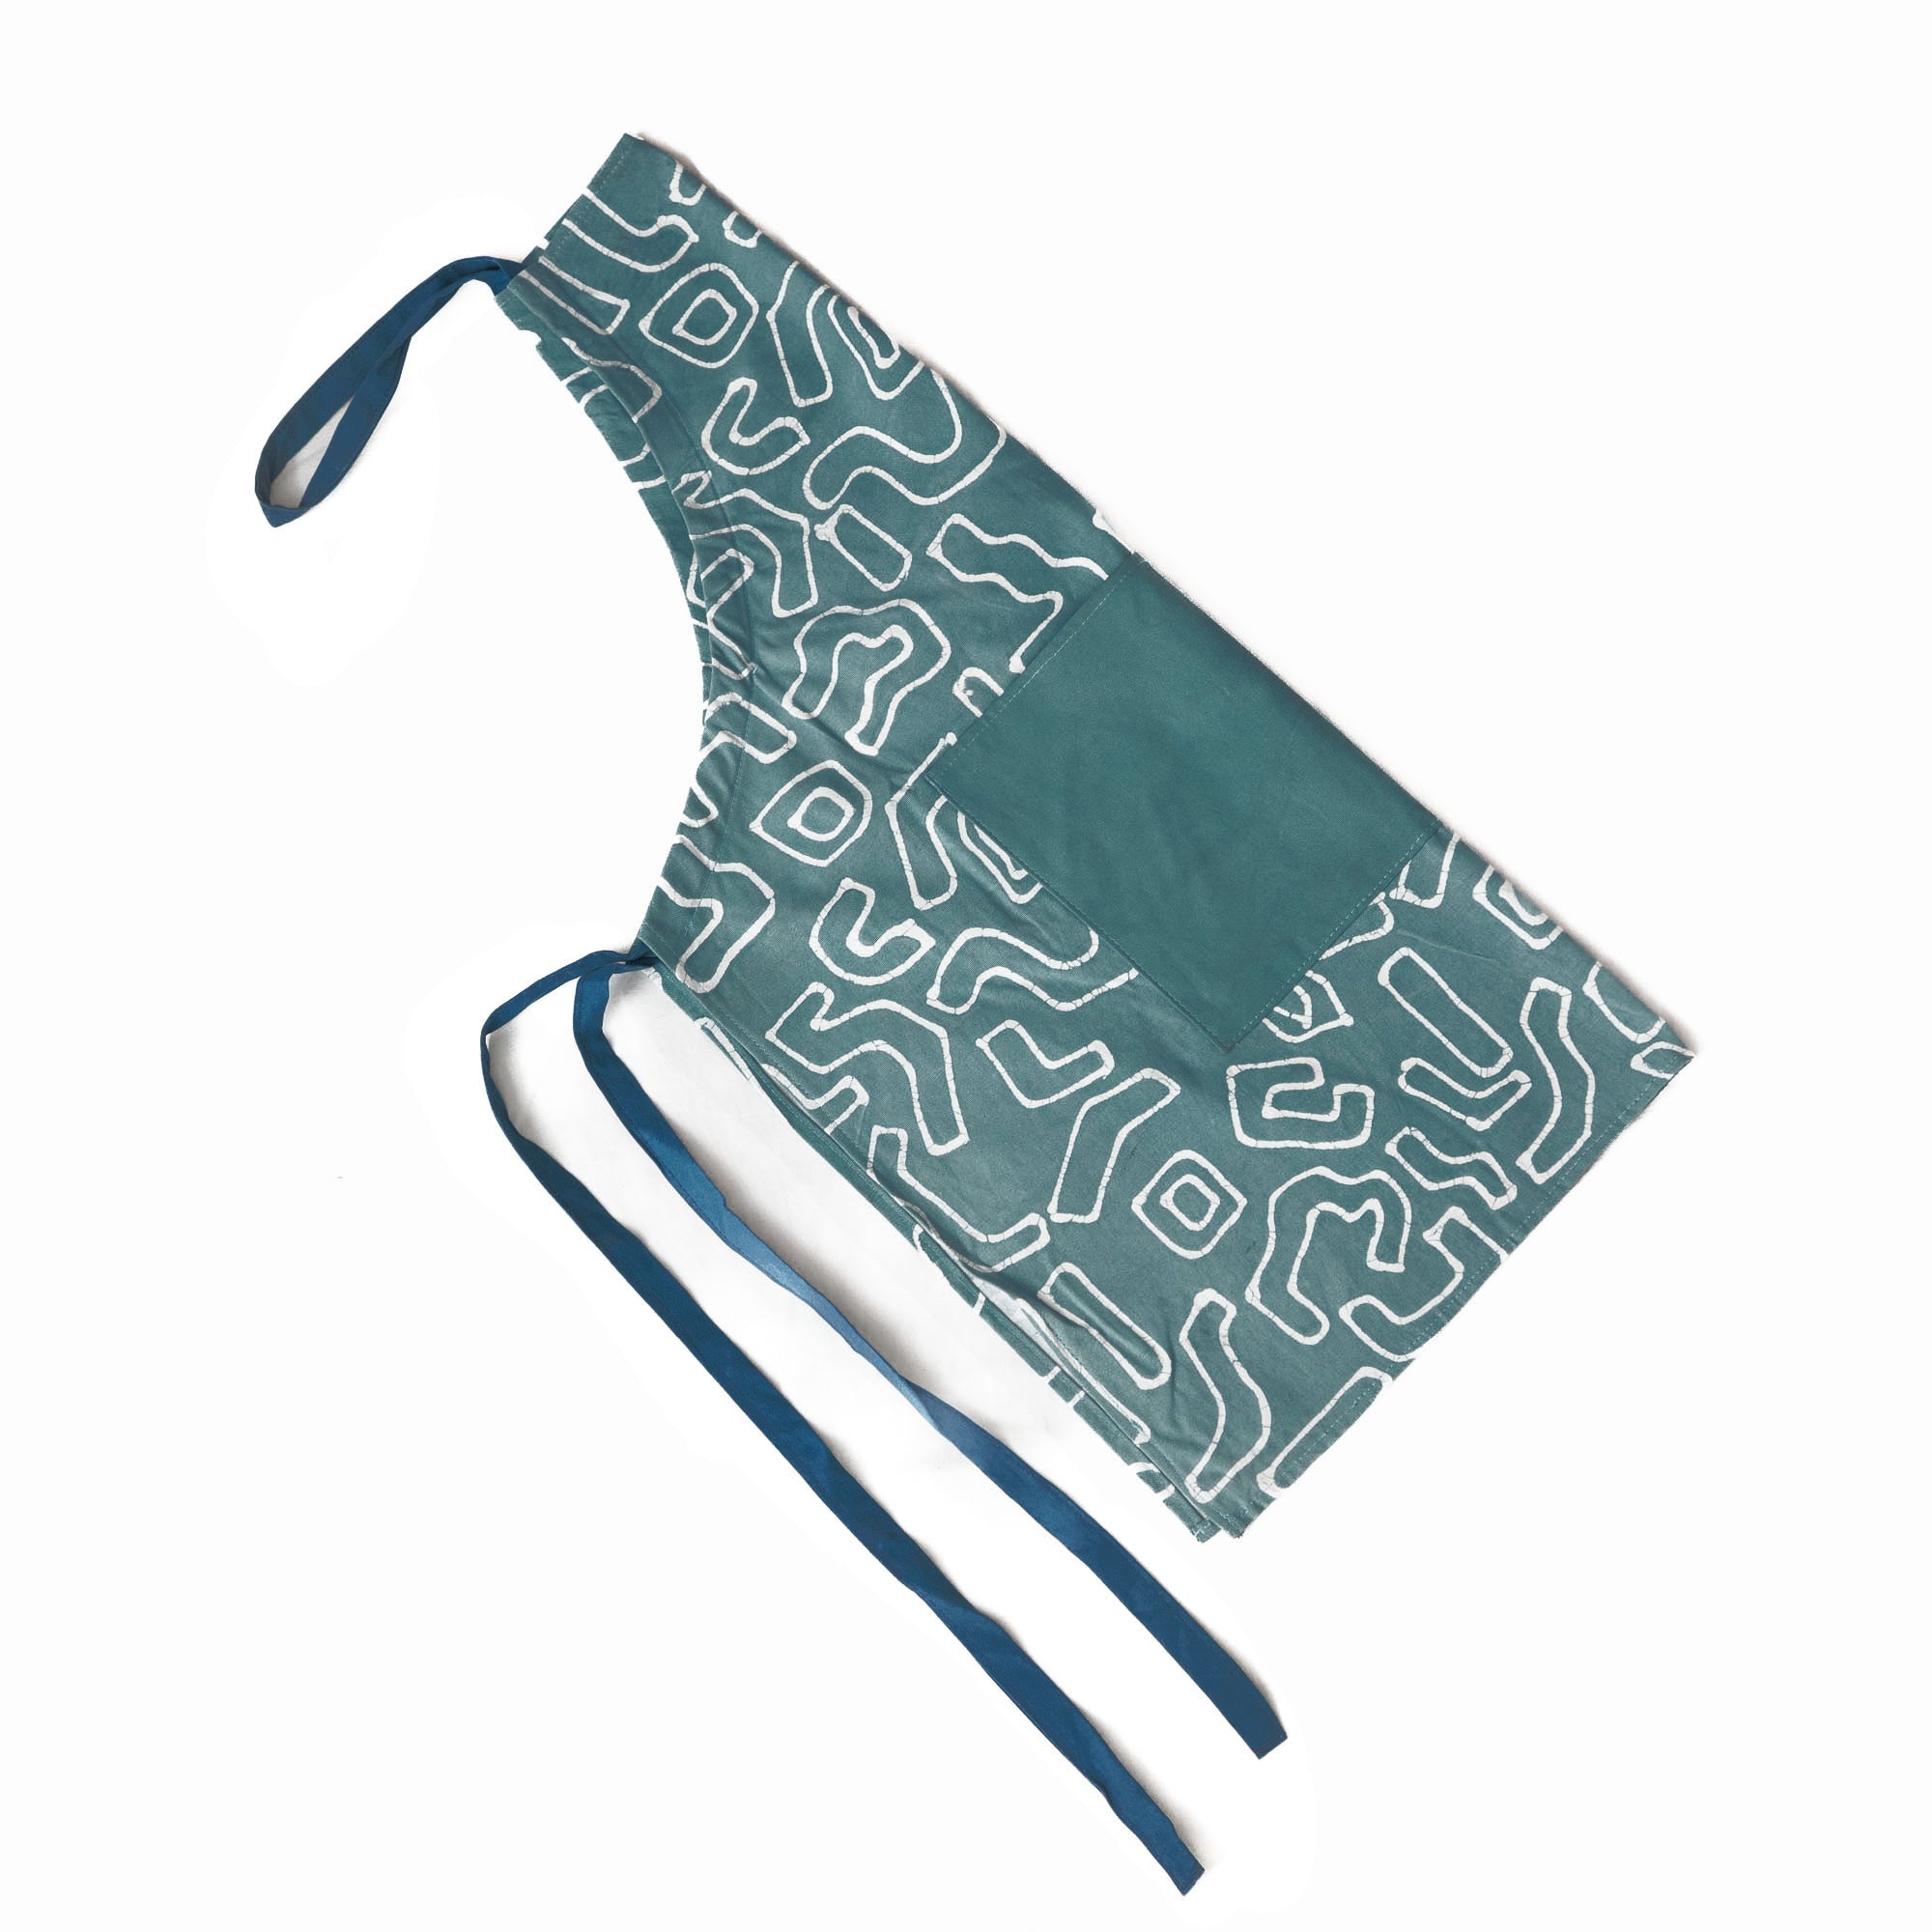 Kuba Blues Outline Teal Apron - Handmade by TRIBAL TEXTILES - Handcrafted Home Decor Interiors - African Made